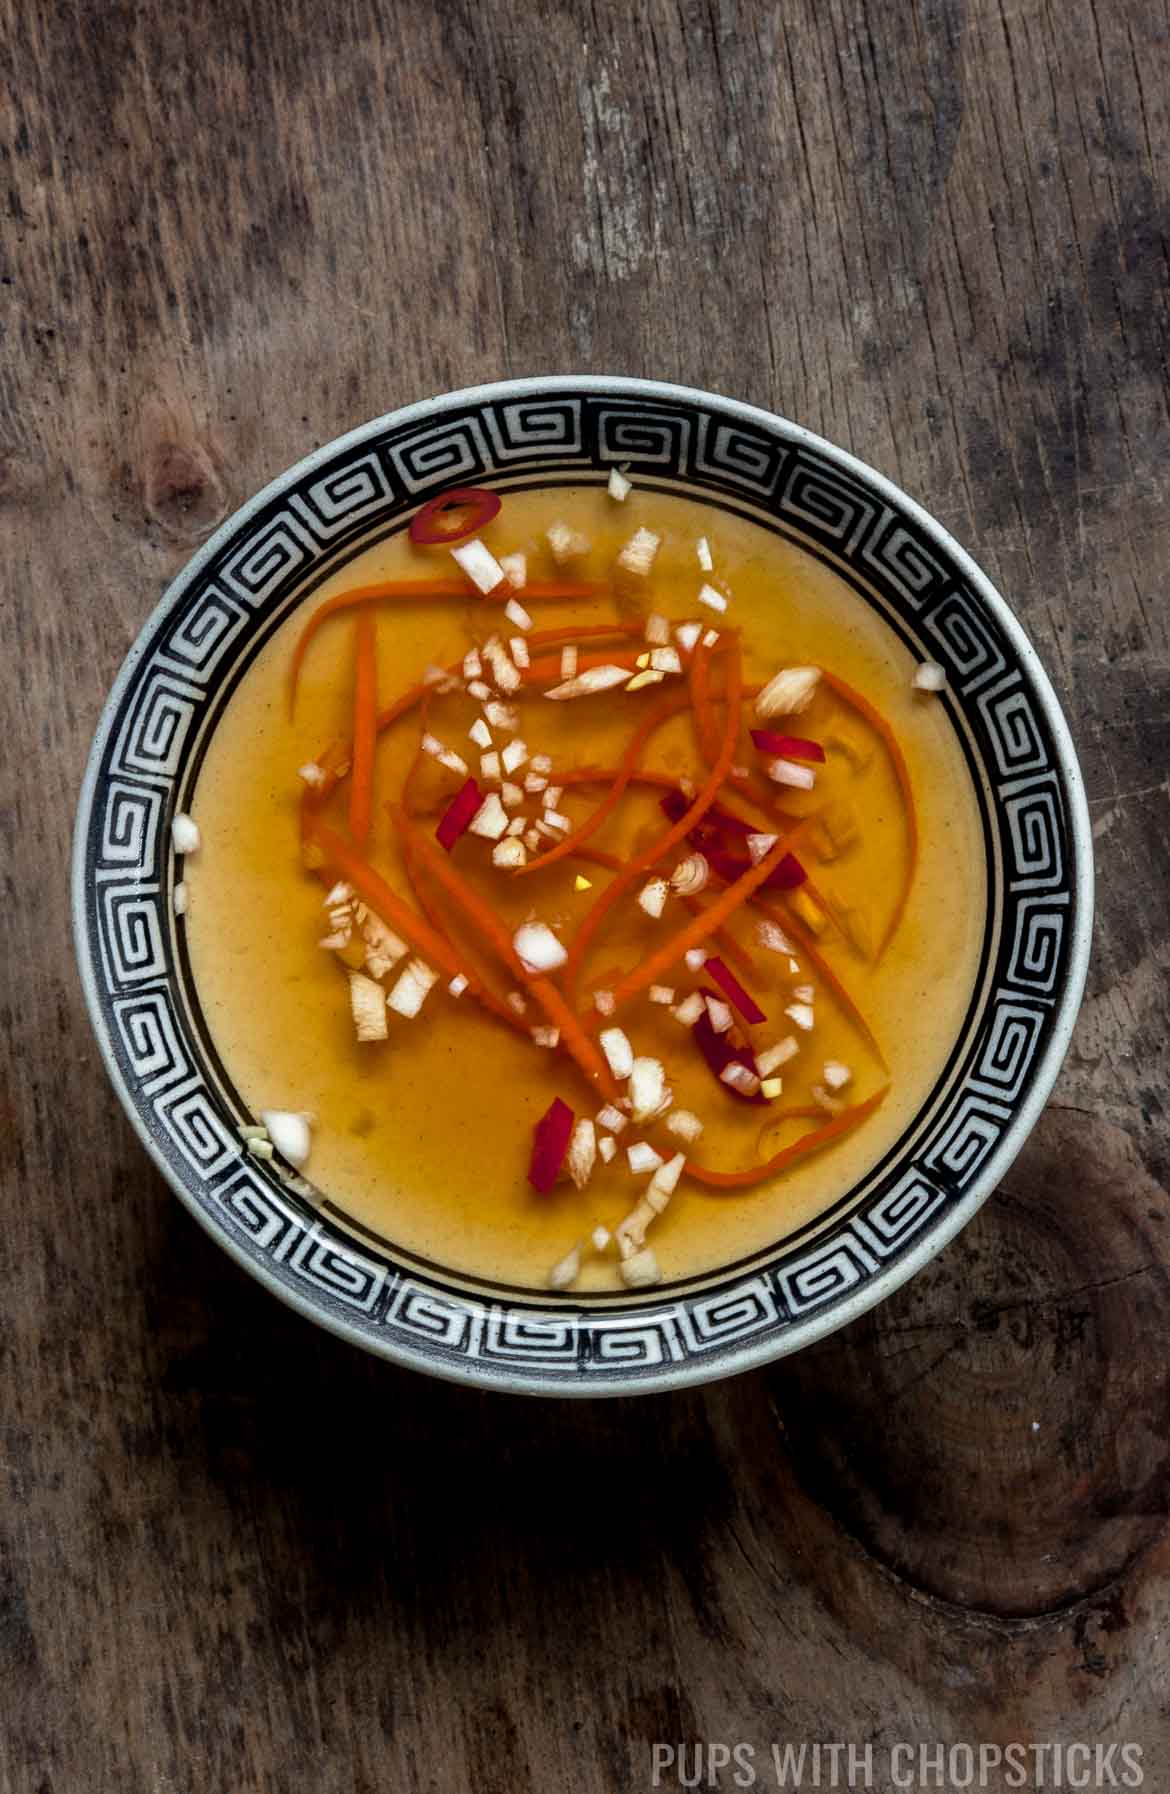 Vietnamese Dipping Sauce (Nuoc Cham / Nuoc Mam) in a small bowl on a wooden table